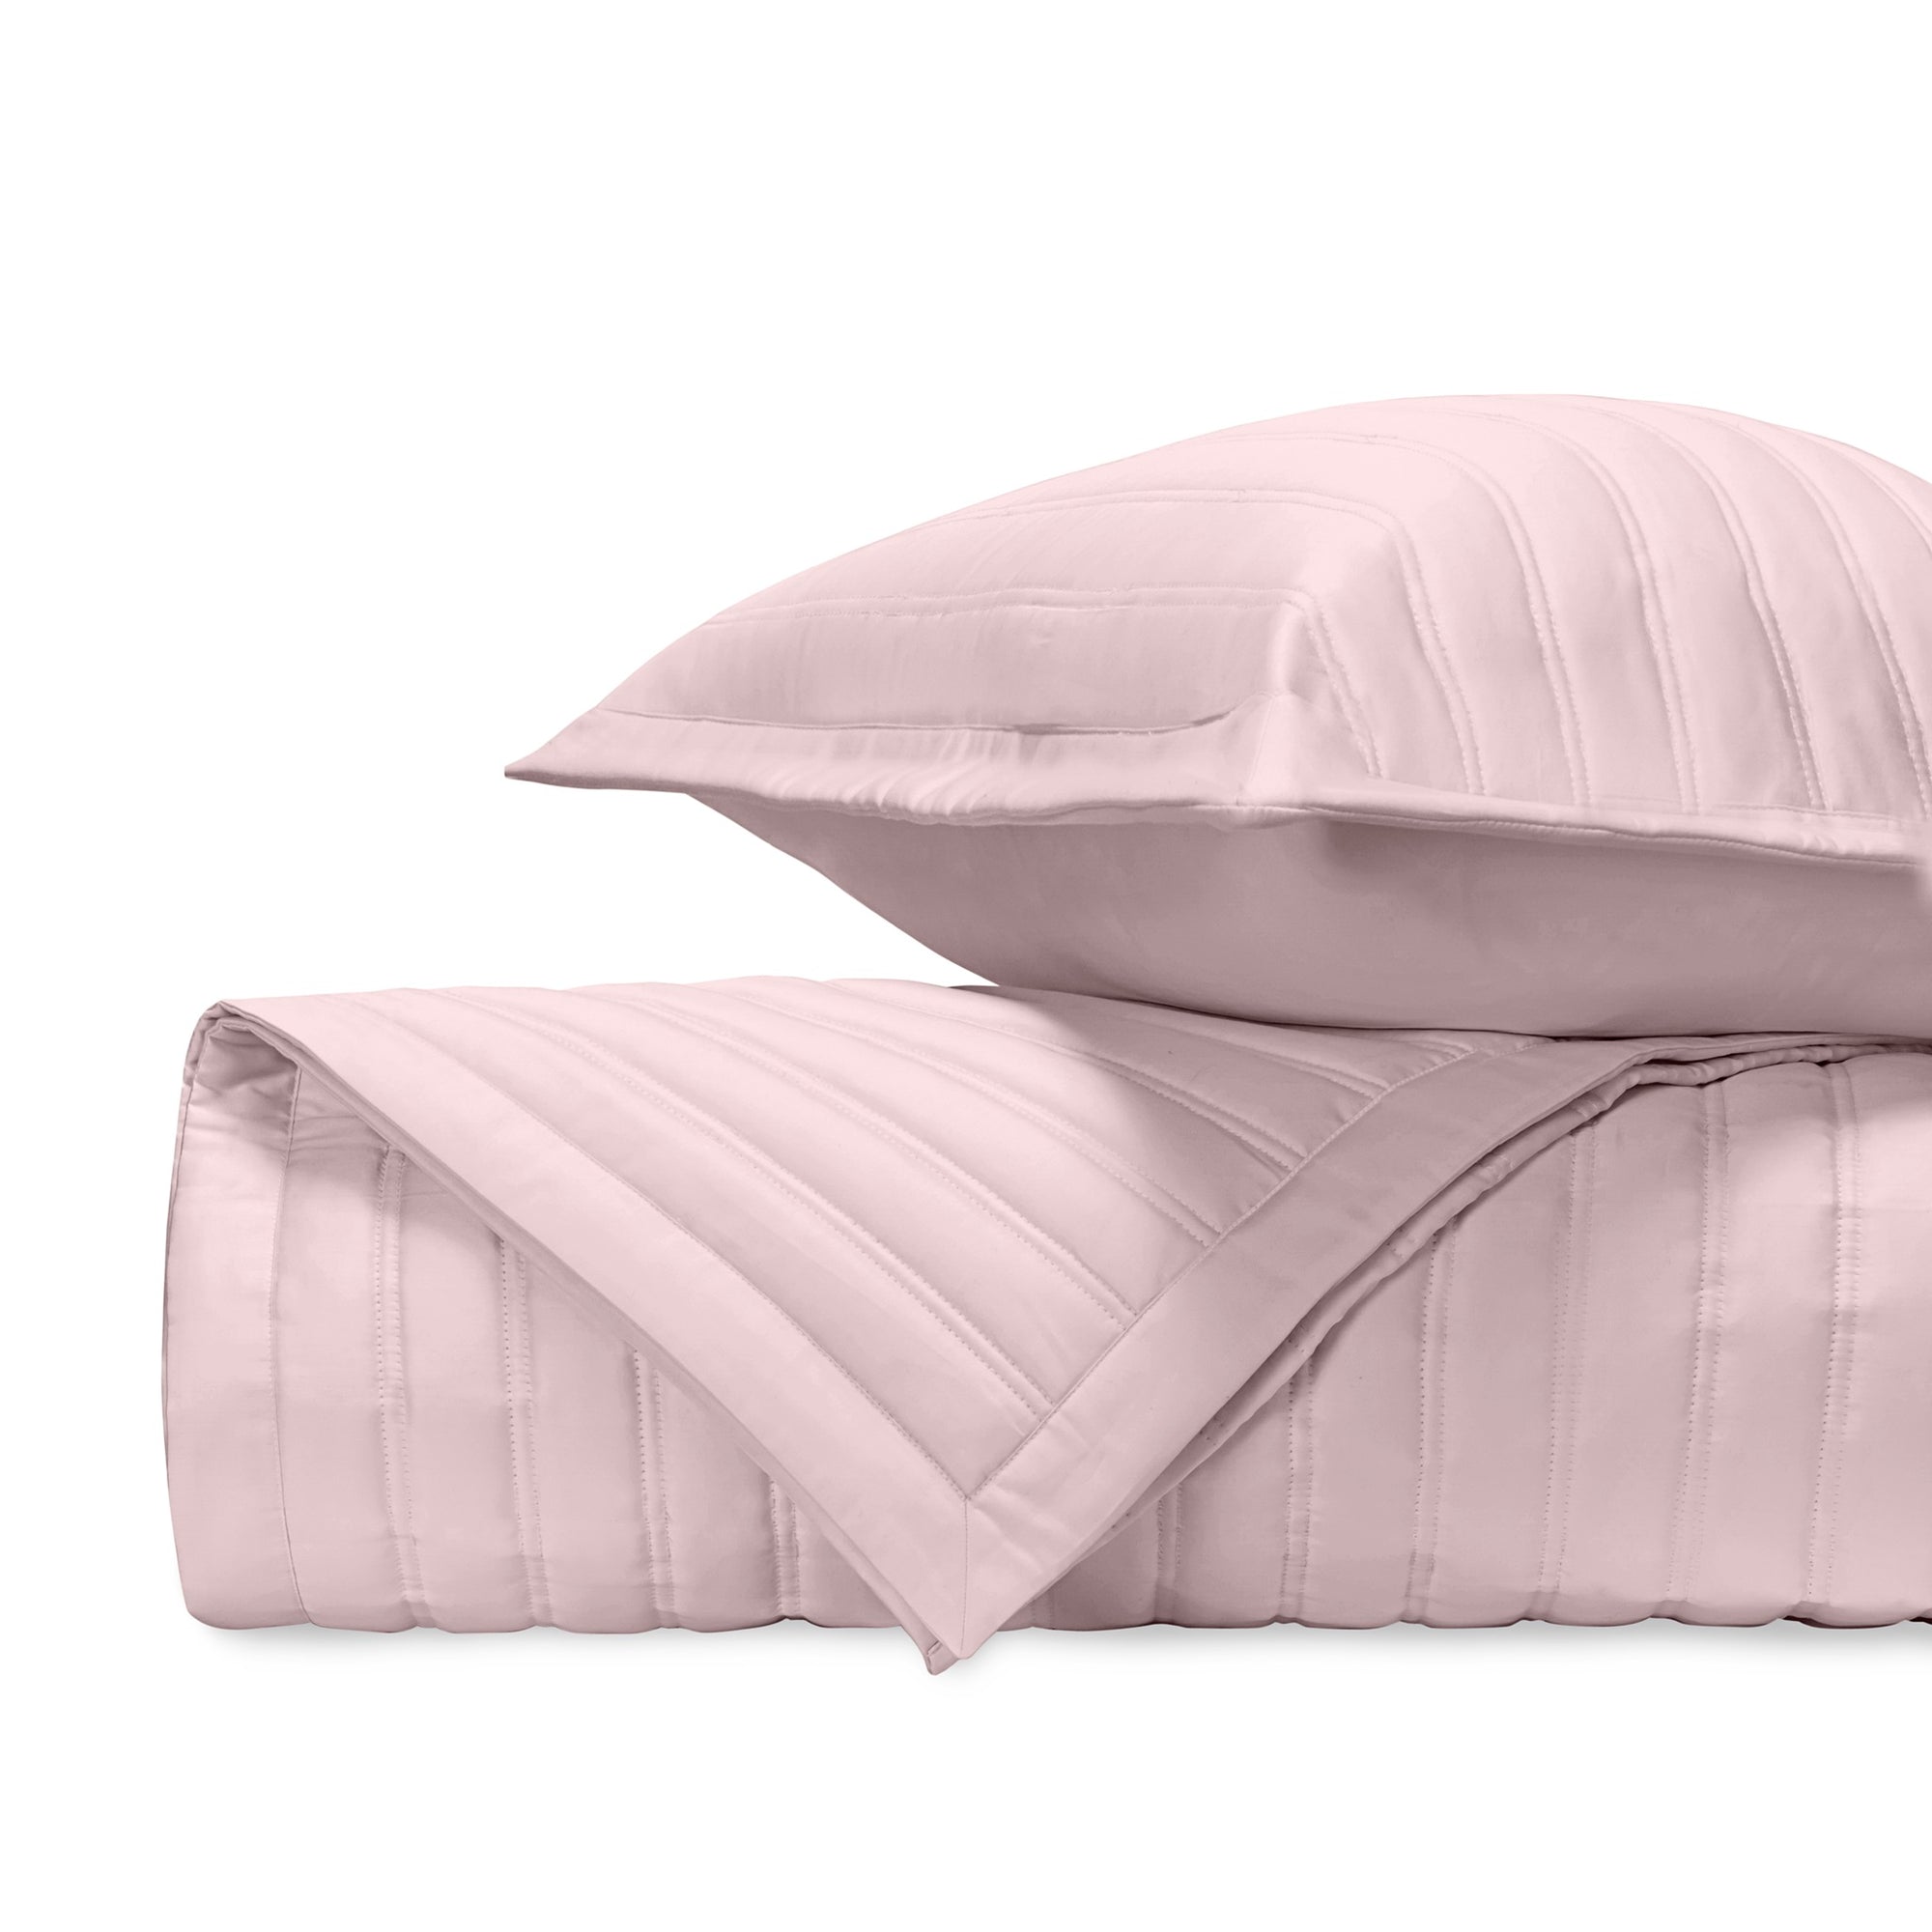 Stack Image of Home Treasures L'Avenue Royal Sateen Quilted Bedding in Color Incenso Lavender